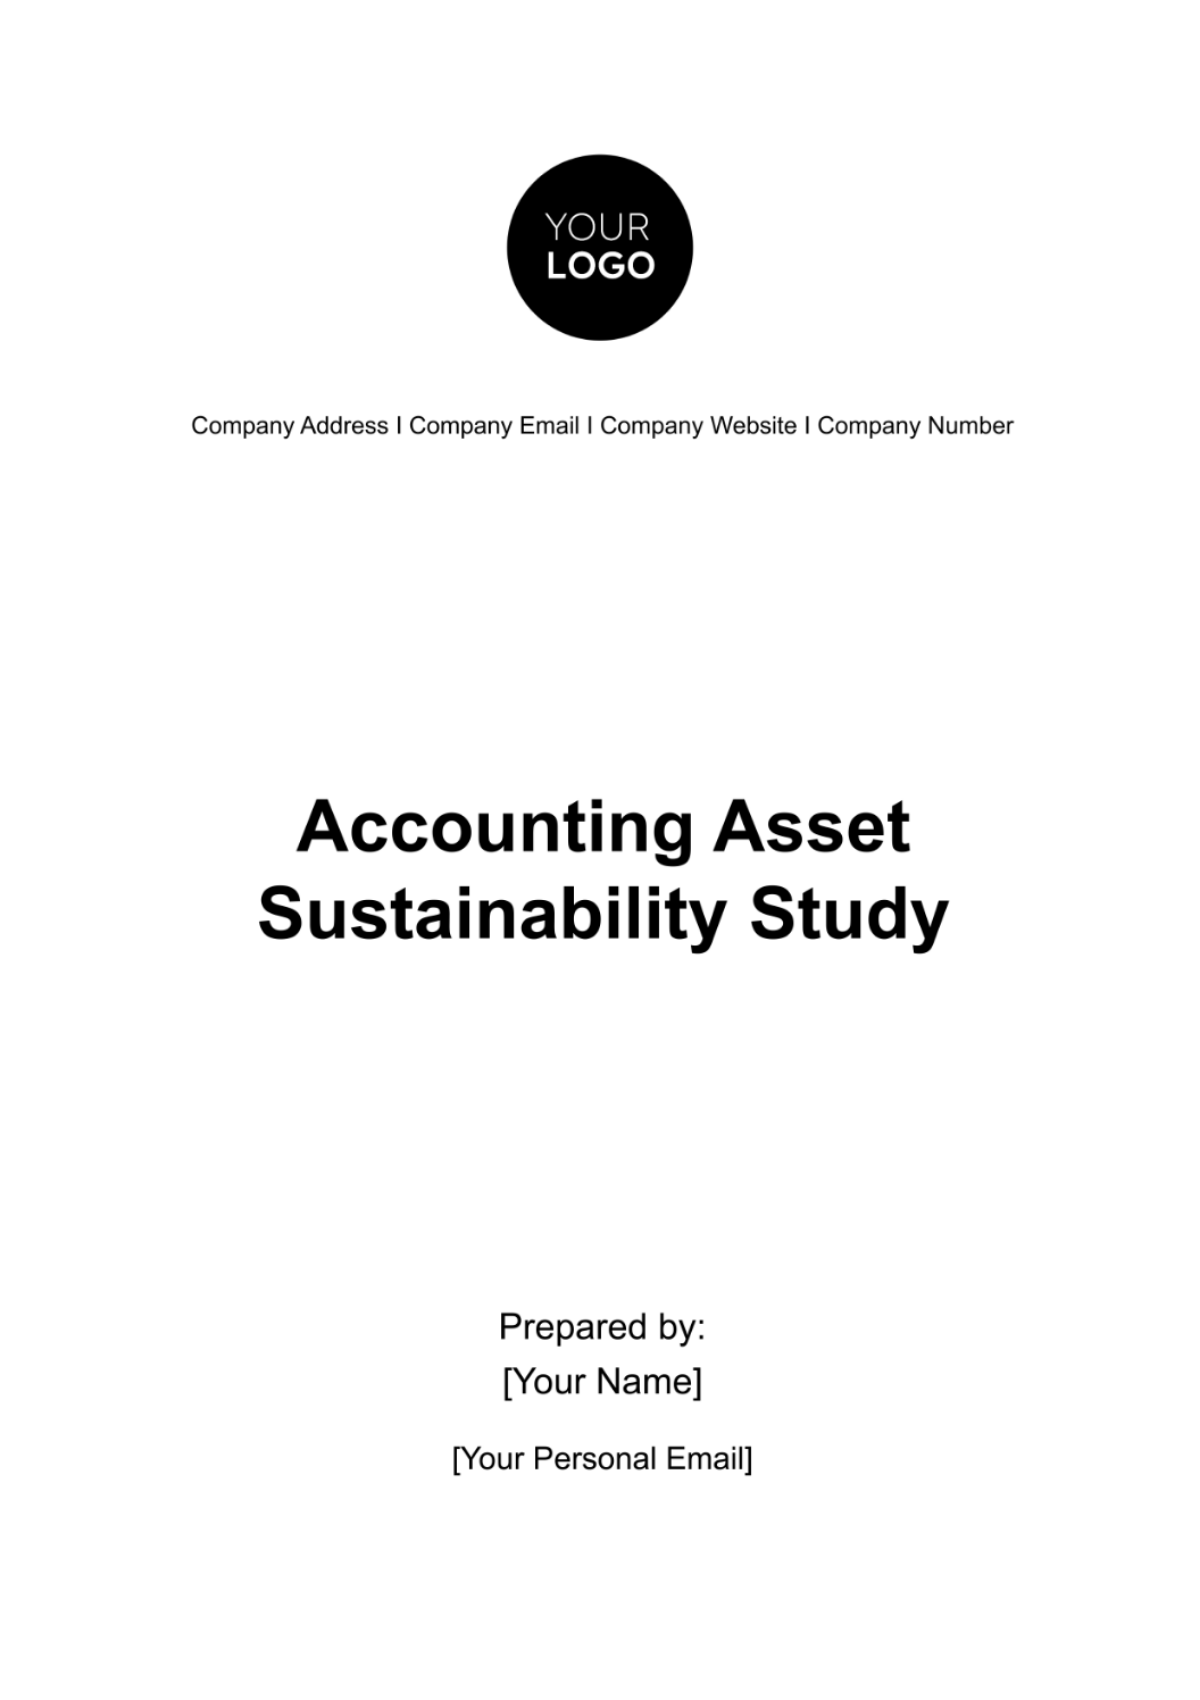 Accounting Asset Sustainability Study Template